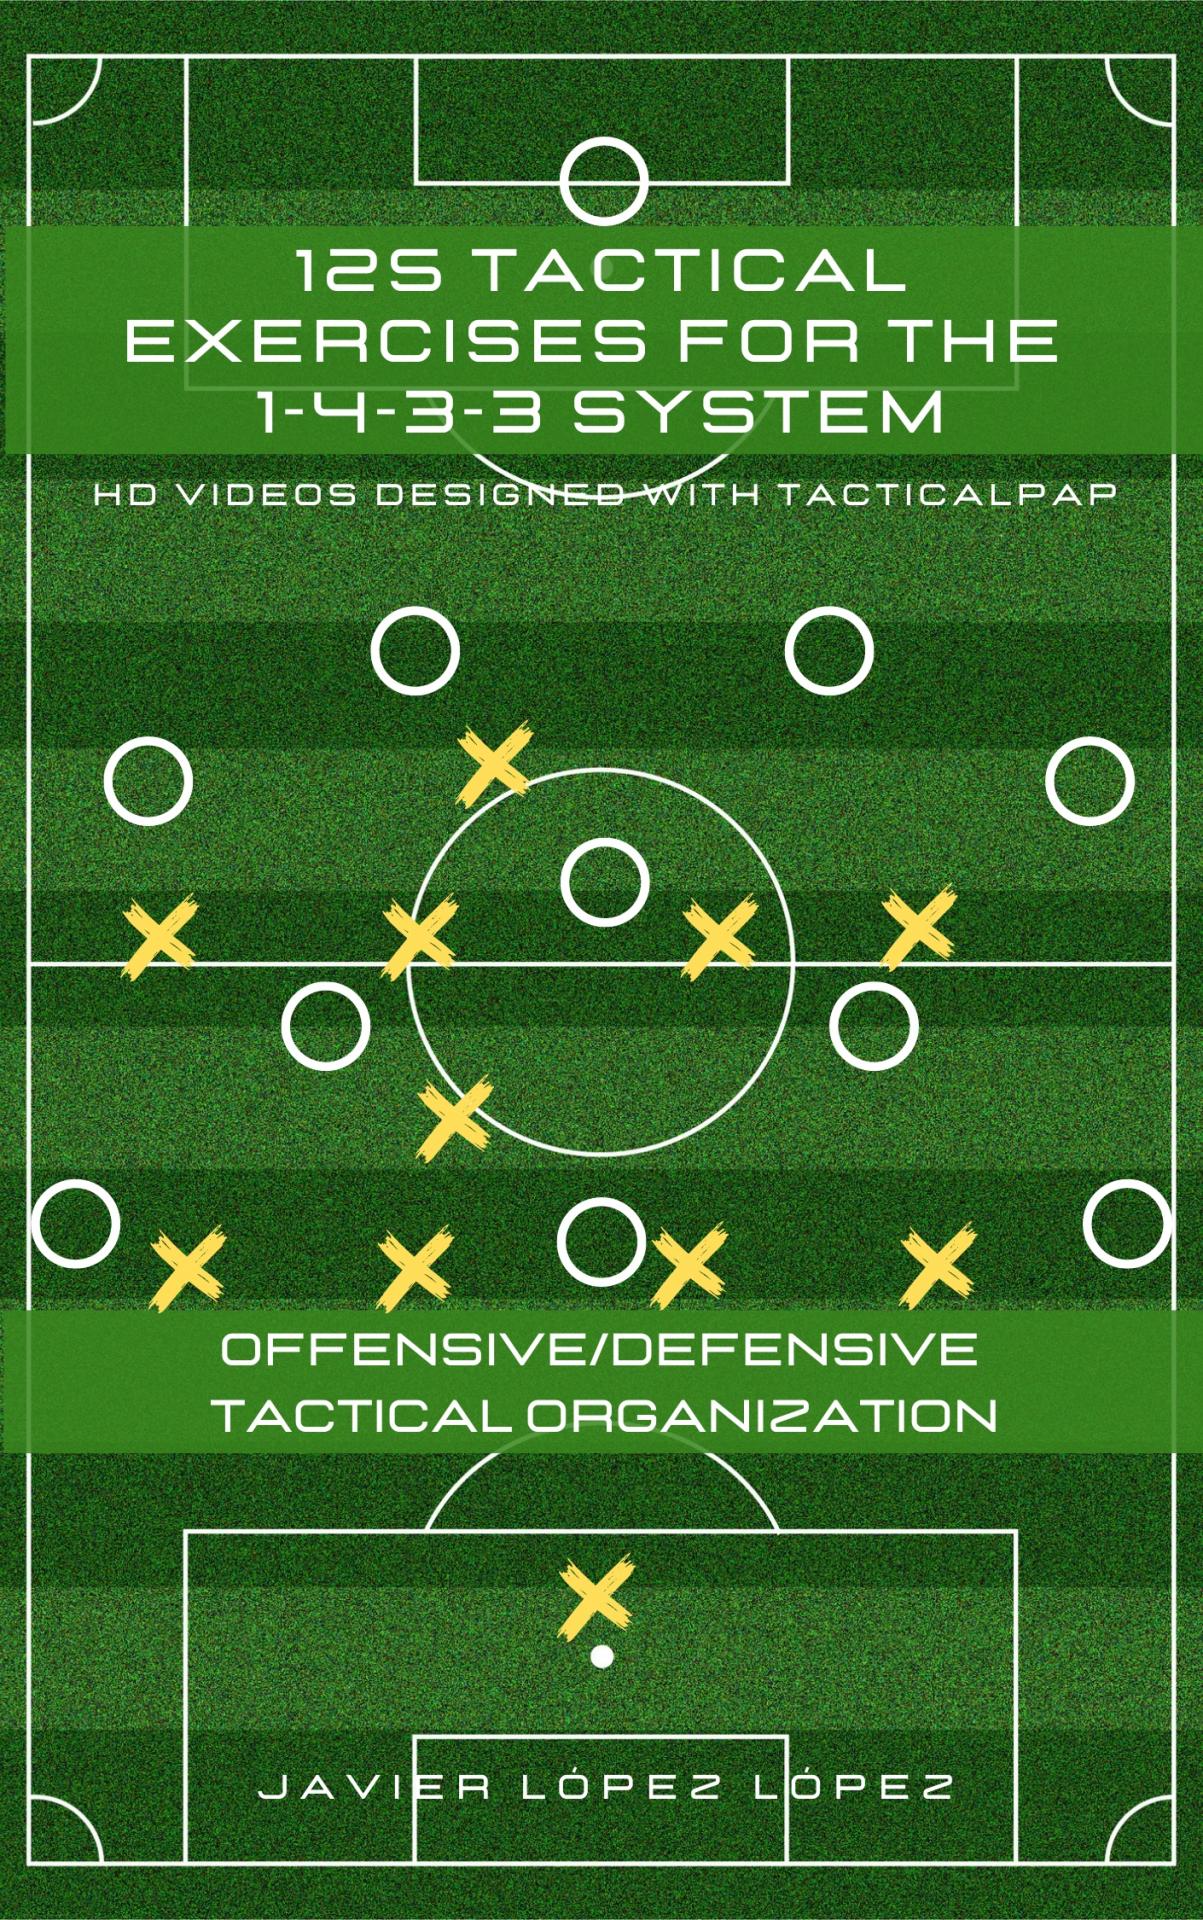 Tactical Planning: 125 Tactical Exercises 1-4-3-3